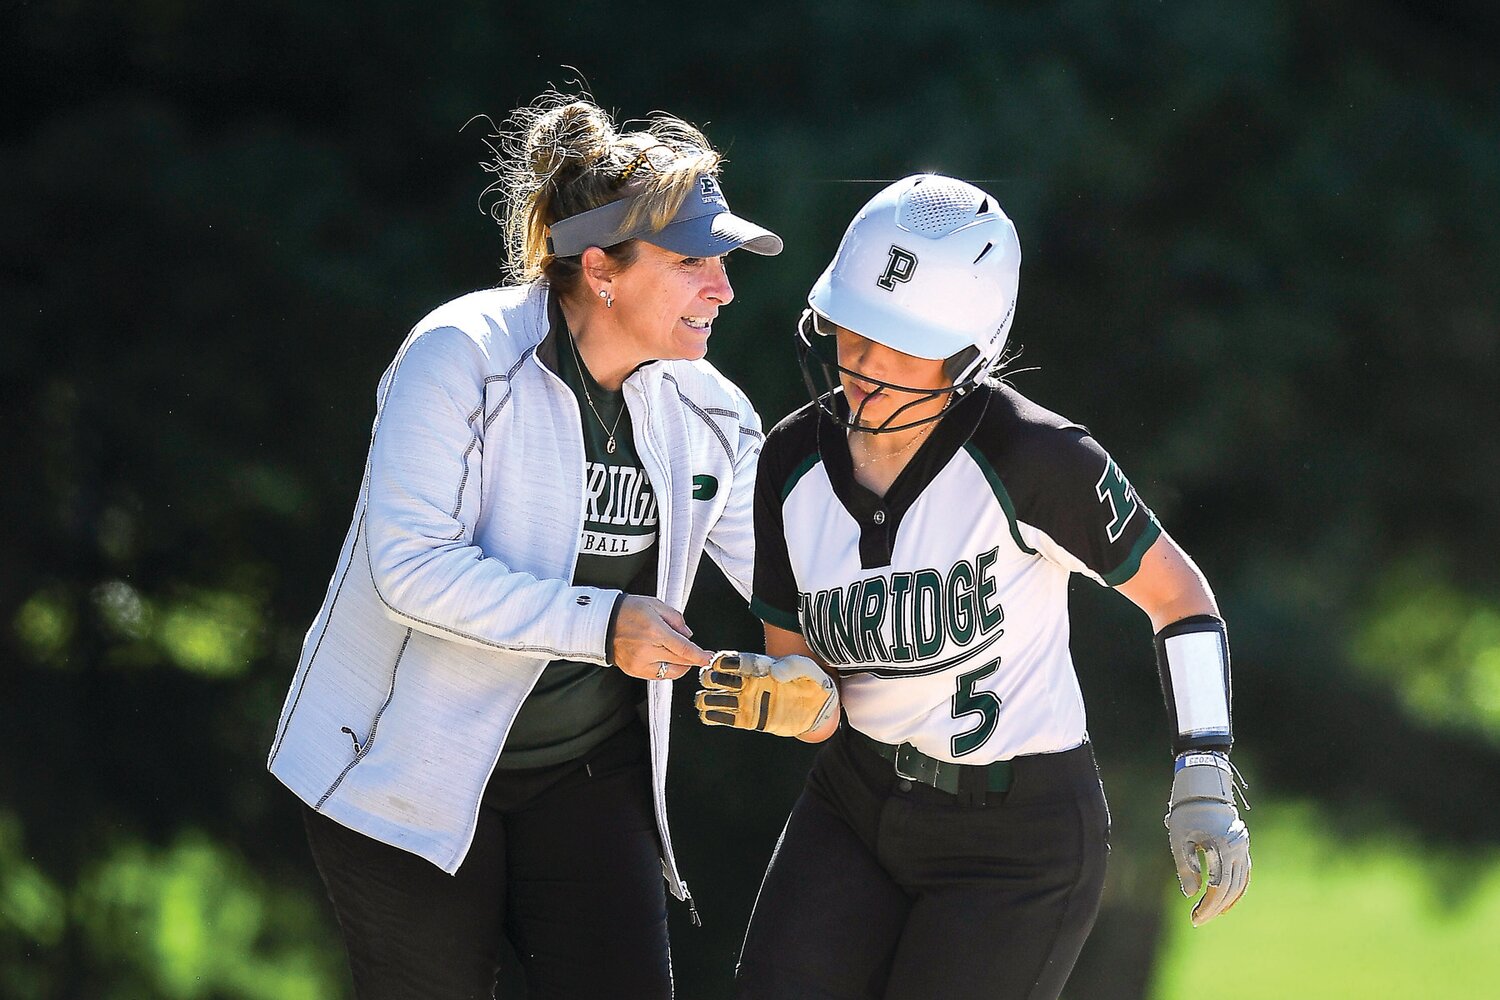 Pennridge manager Wendy Iadonisi congratulates Ryleigh Lilly after her two-run fourth-inning home run, which put Pennridge up 4-0.